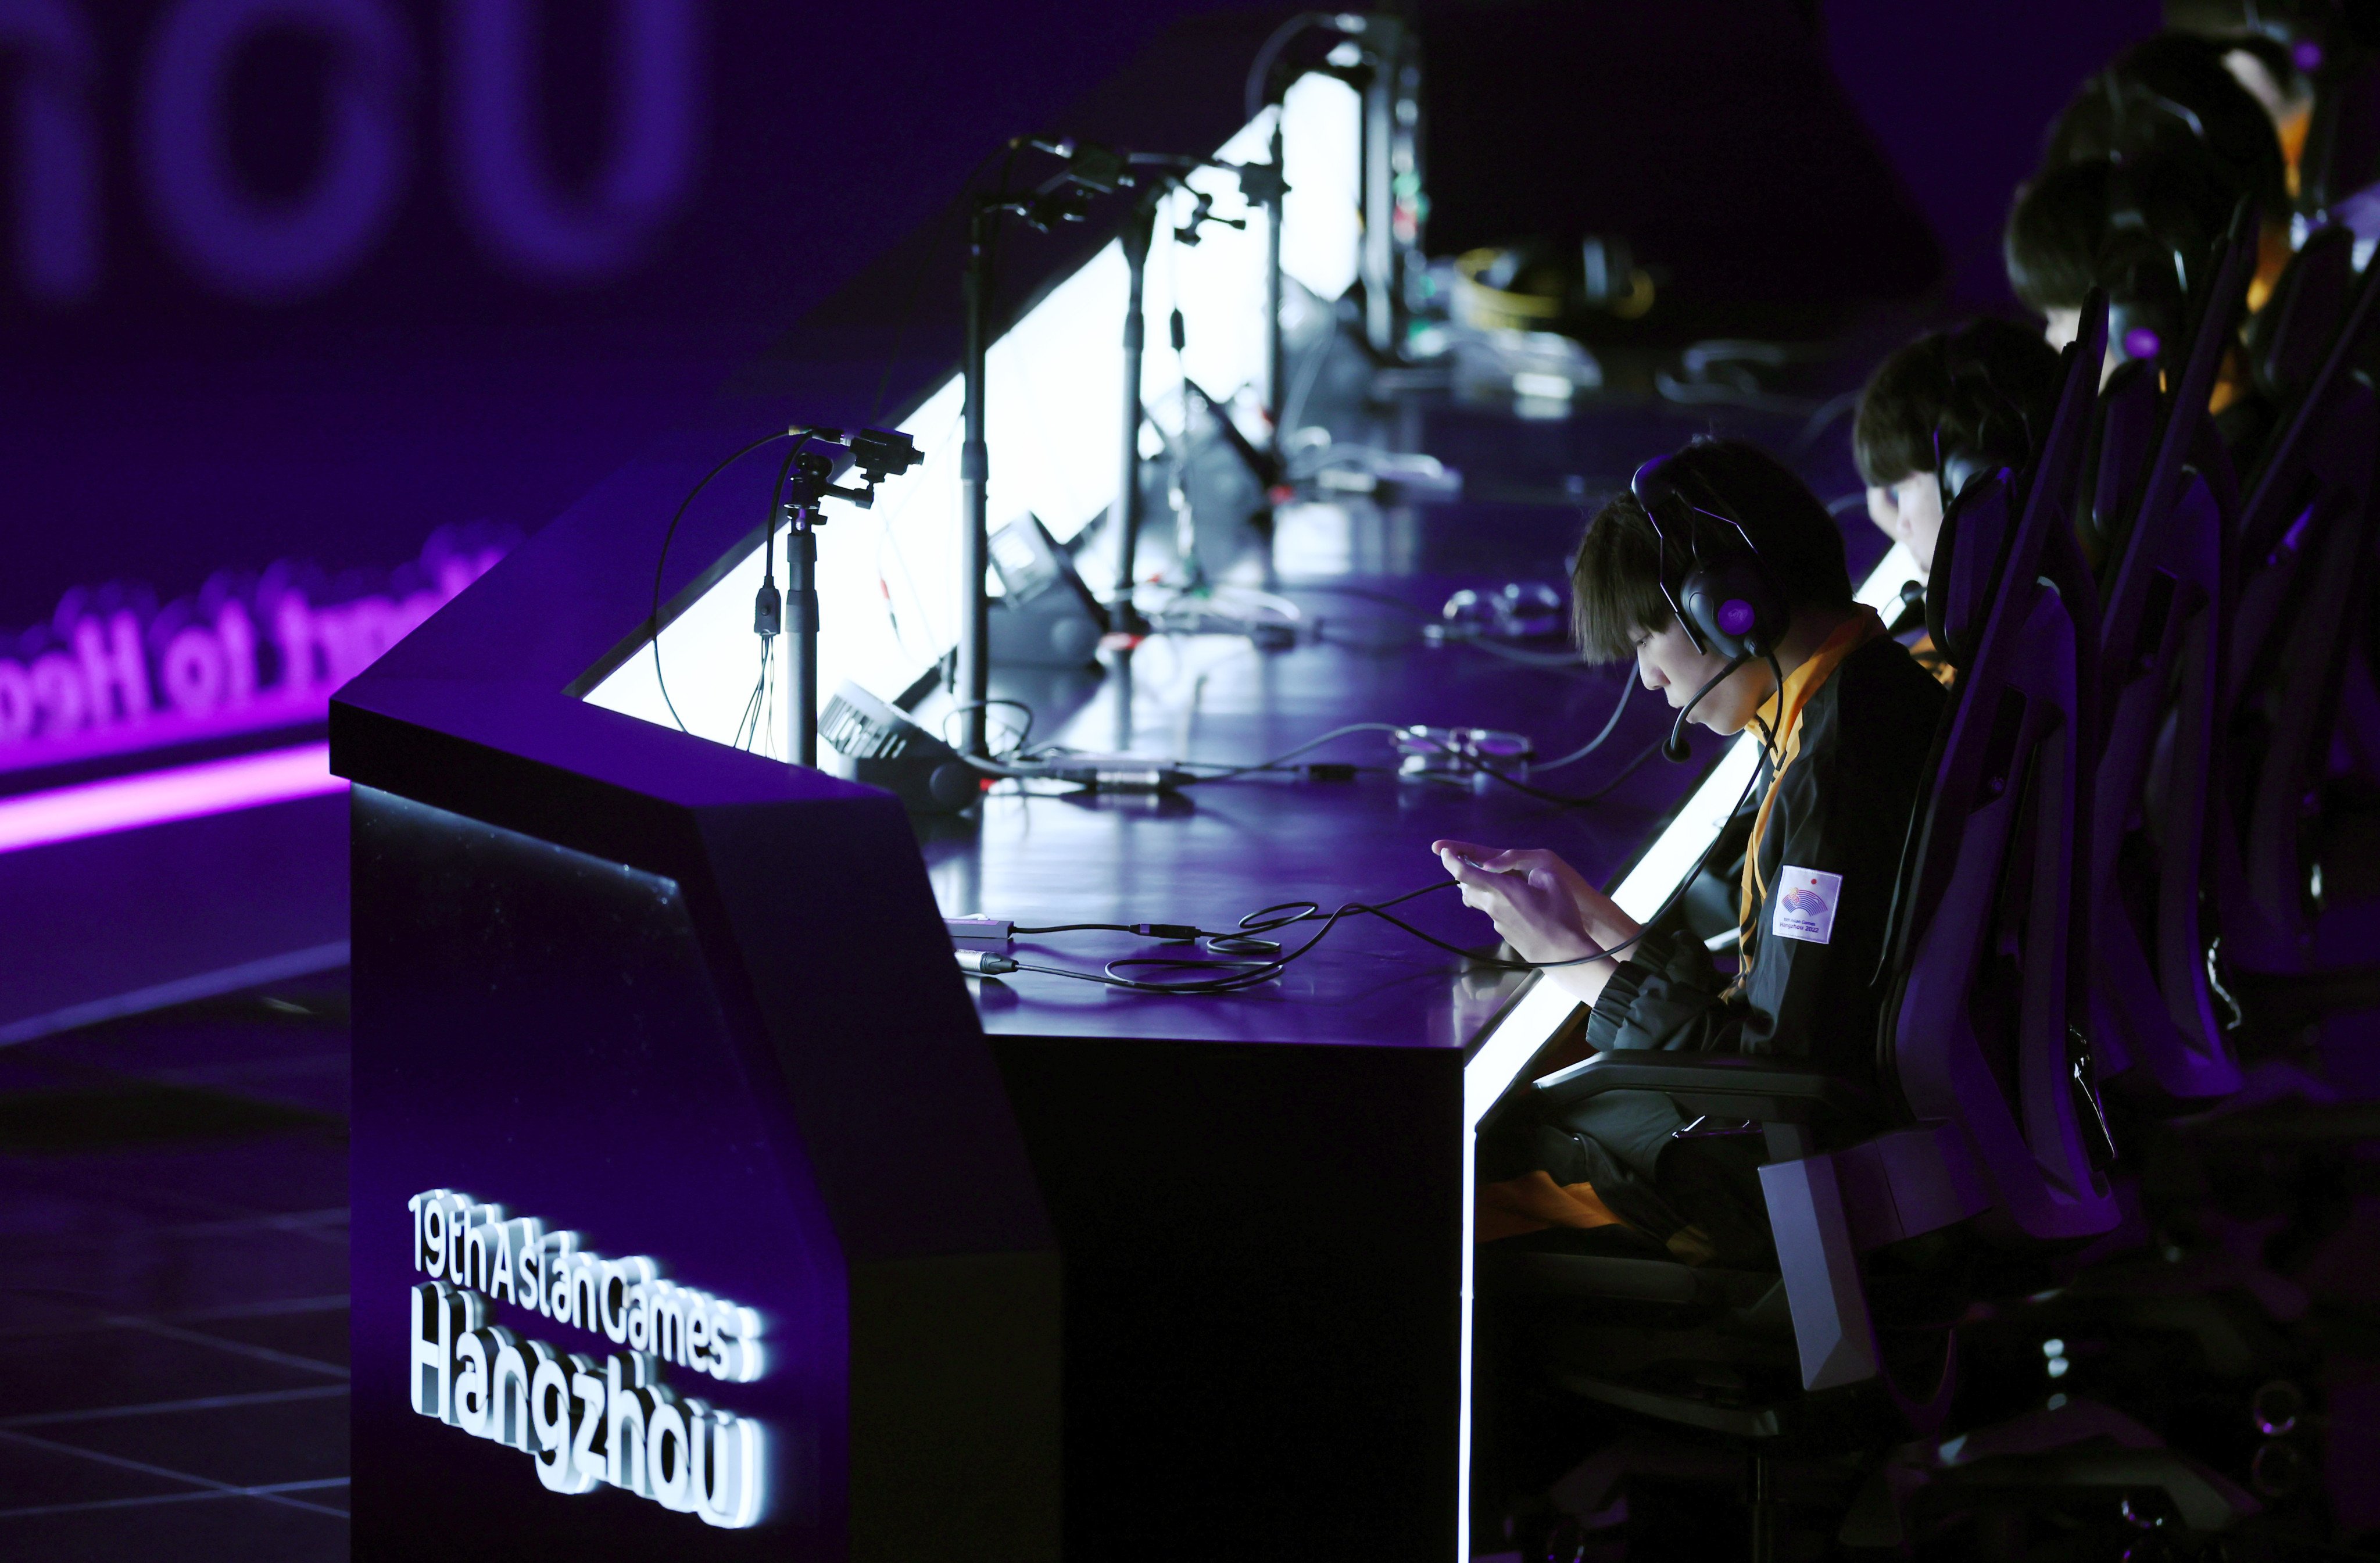 Louis Vuitton makes esports move with League of Legends World